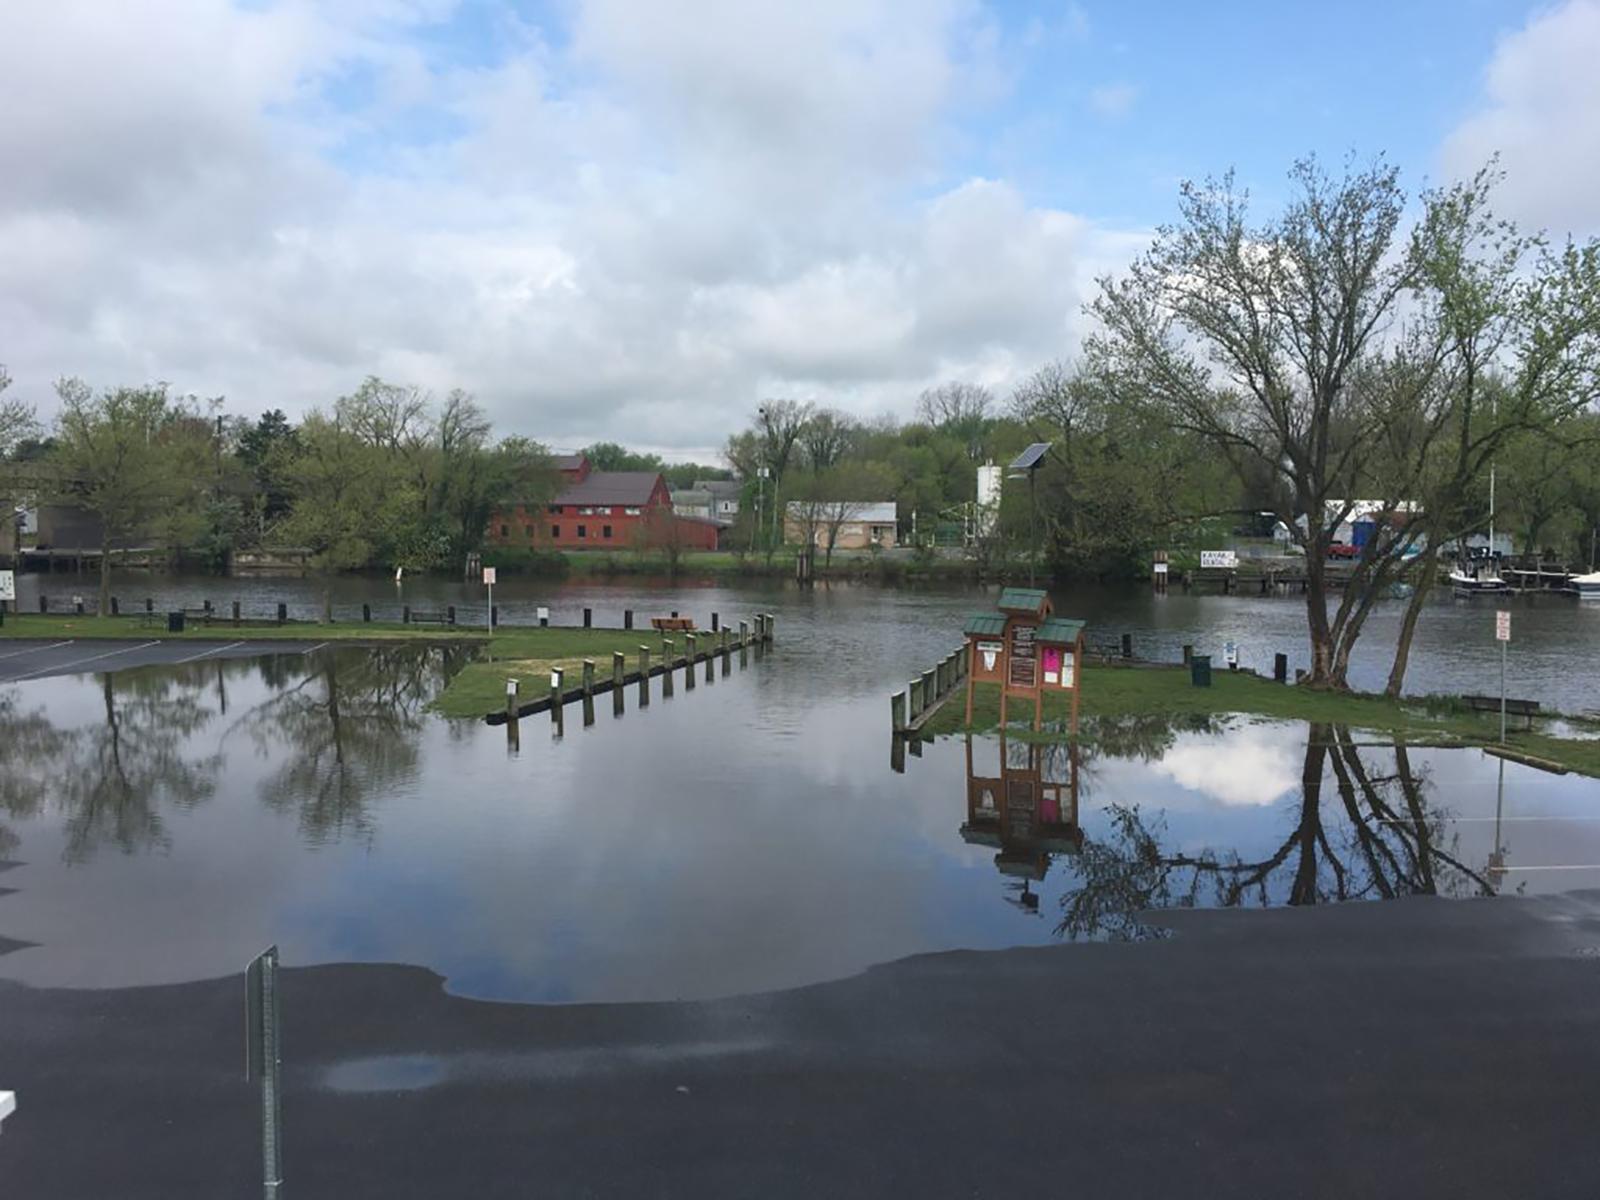 Image of nuisance flooding in Denton, MD